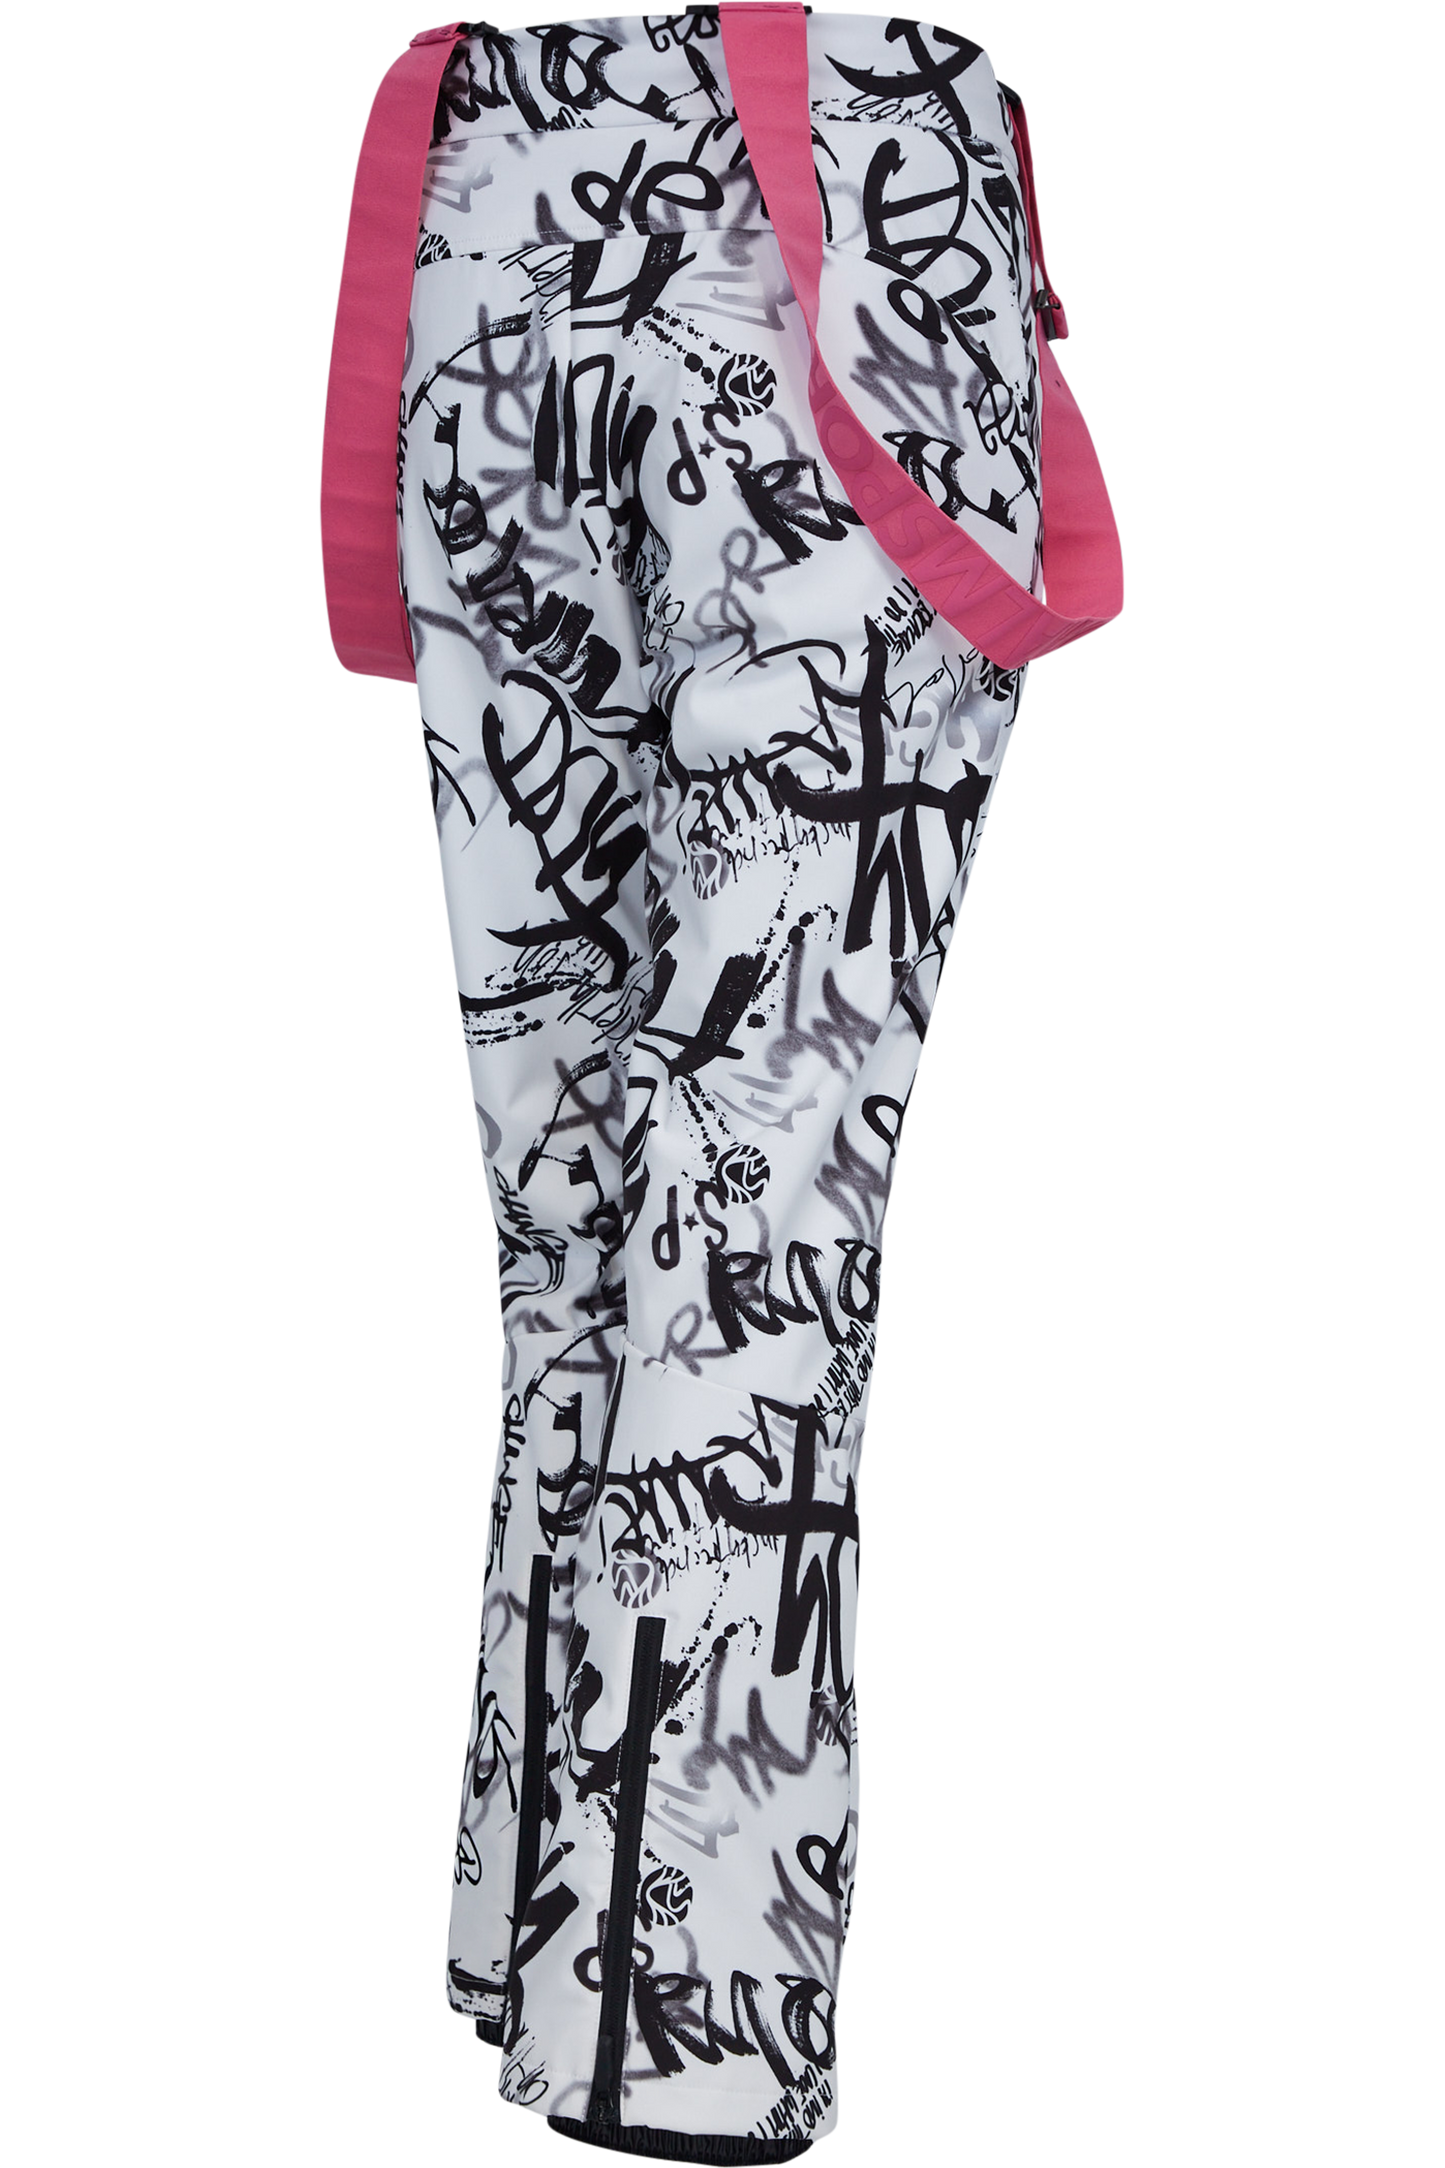 Pants with Graffiti Print and Suspenders